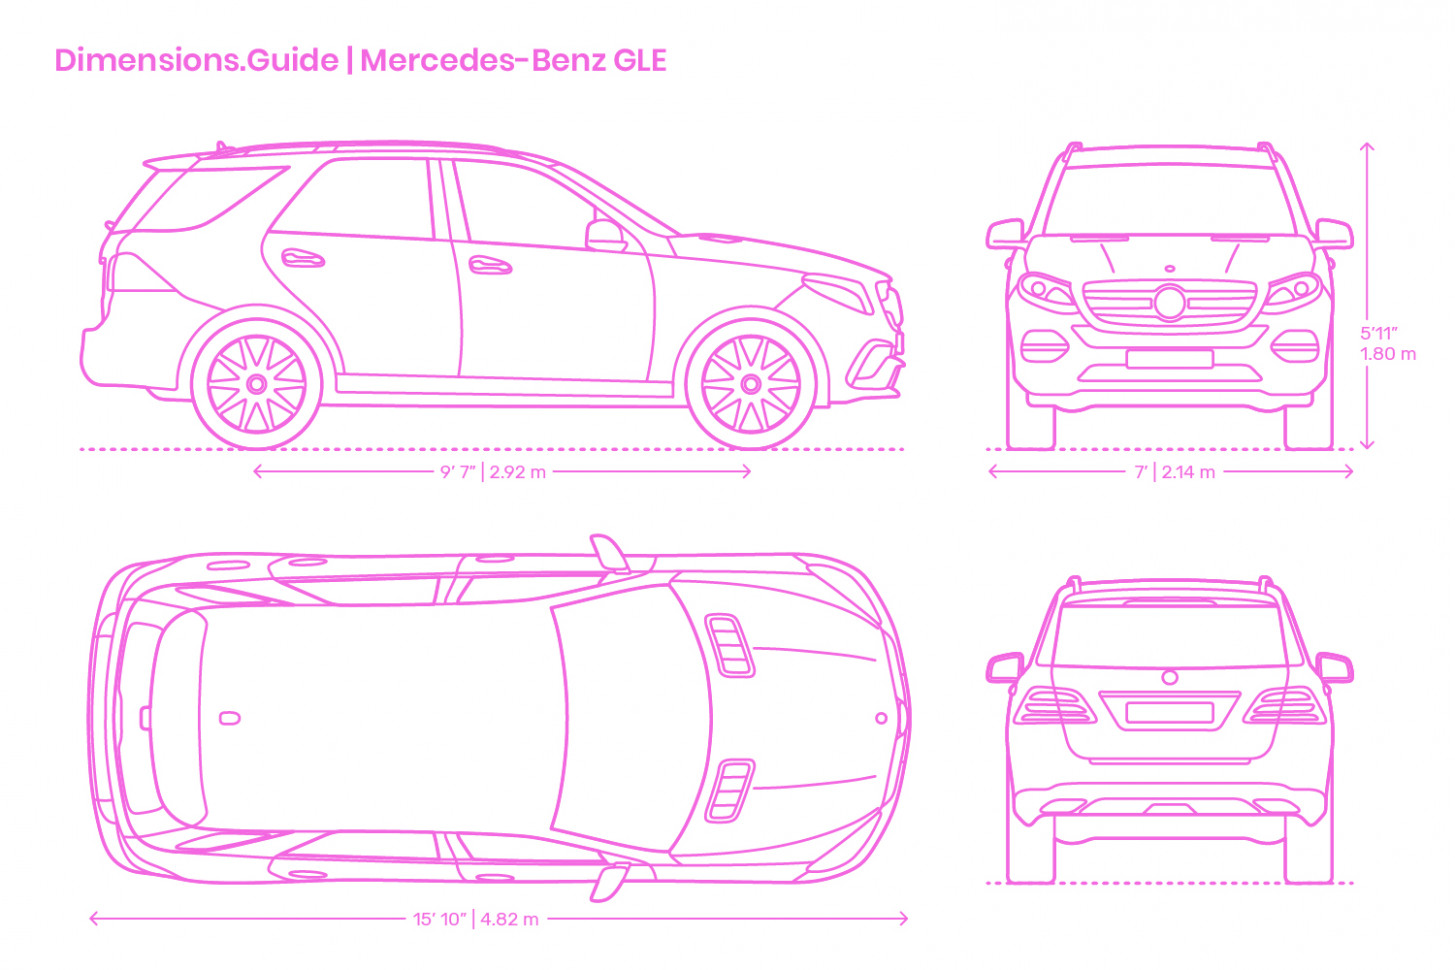 Mercedes-Benz GLE Dimensions & Drawings  Dimensions